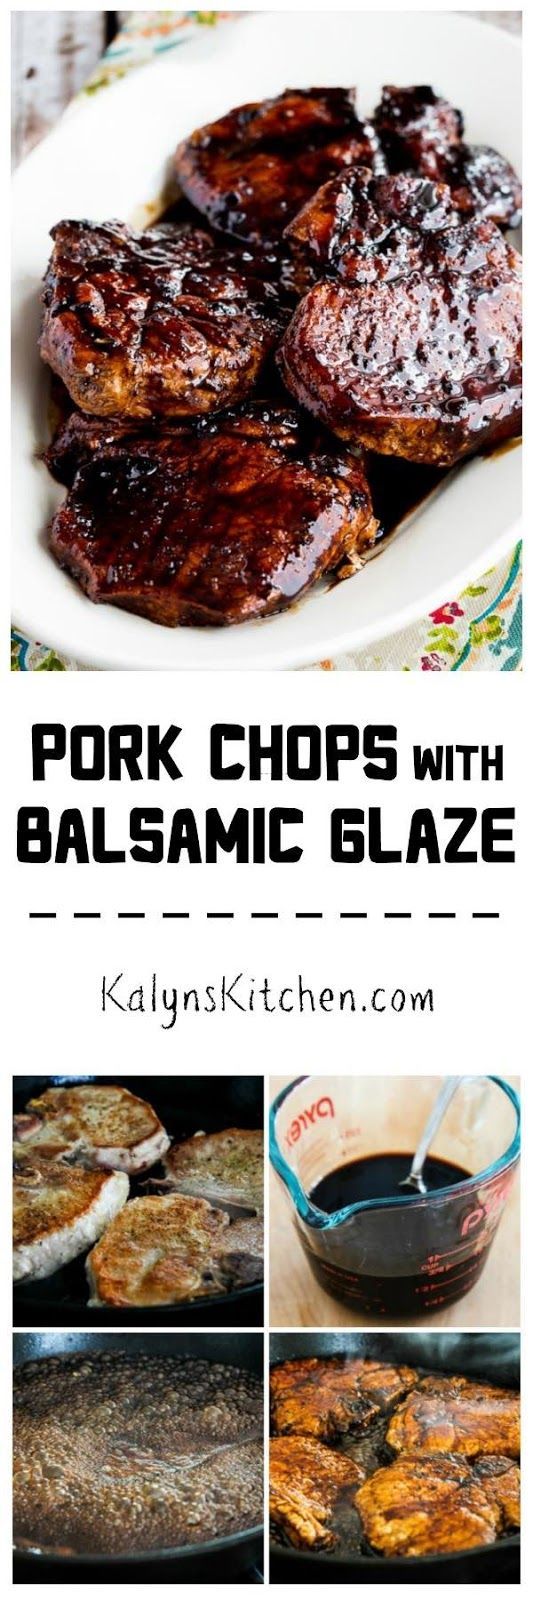 I love these delicious Pork Chops with Balsamic Glaze, which are quick and easy to make. Use an approved sweetener and this will